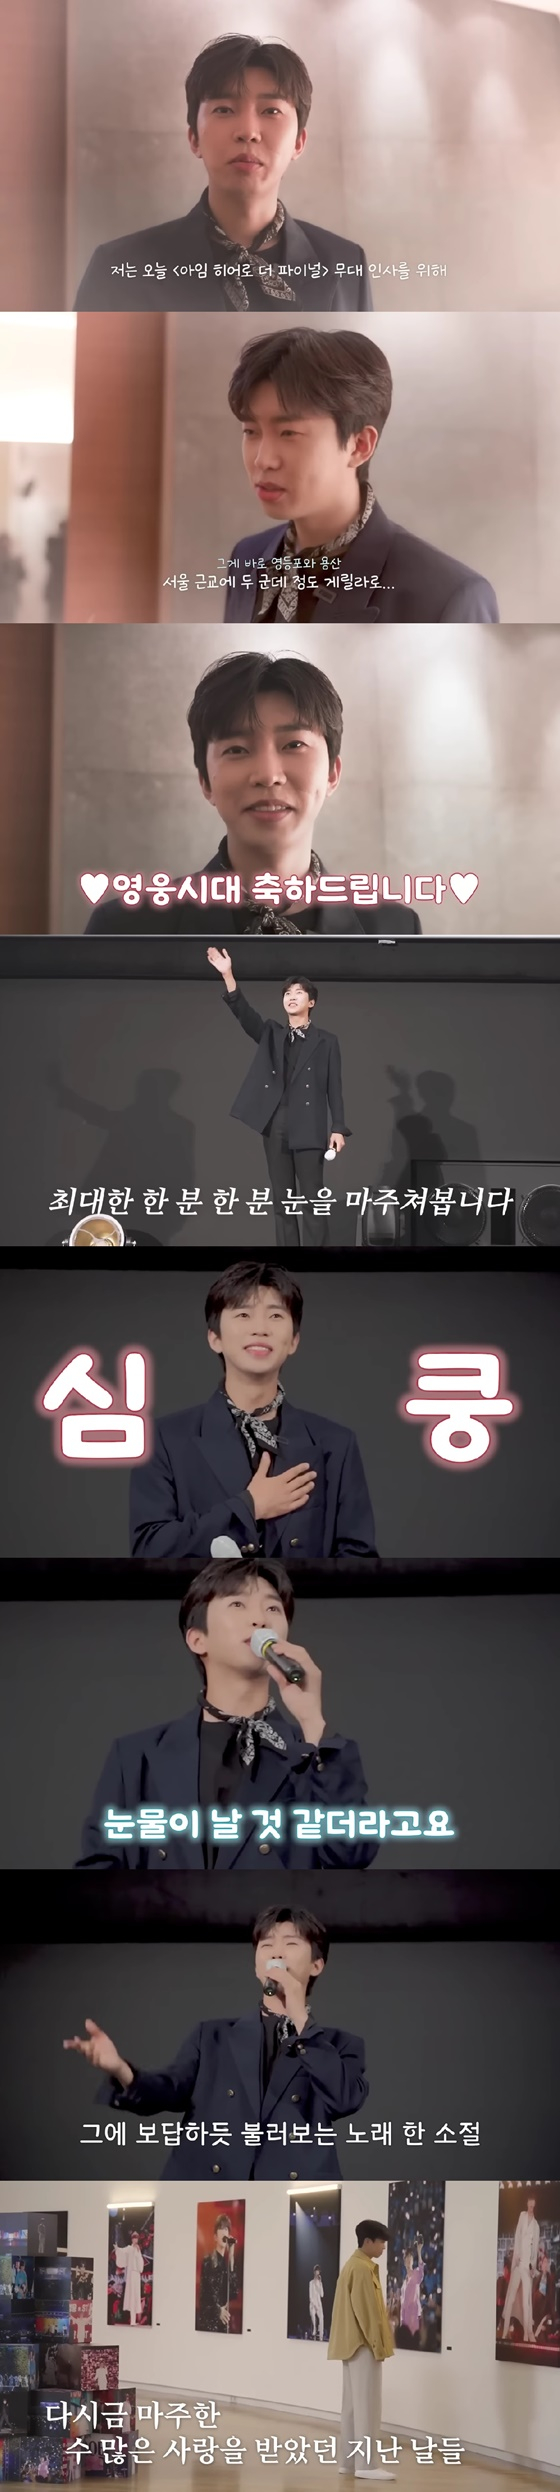 Lim Young-woongs official YouTube channel posted a video titled Lim Young-woong movie theater raid case?The video, which was released on the day, featured Lim Young-woong, who was ready to meet fans with a scarf point.Lim Young-woong said, Im in Yeongdeungpo today to greet the stage of Im Heroes the Final Fantasy XVI. (Audiences) will be surprised, right? Im excited to surprise them.I want to go to Busan until my heart, but Death Before Dishonor is not easy to do, so I came to Death Before Dishonor in two places near Seoul.So when Staff said, Its the number one movie advance rate, Lim Young-woong said, I congratulate you on heroic age.Soon Lim Young-woong appeared in the multiplex of the fans hot acclamation. He glanced at the fans one by one, and the fans applauded while playing in the seat.Lim Young-woong, who met fans after a long time, said, I went to the United States to perform. I rested for about two weeks and came to see you.He also told fans who visited Multiplex, I am here with you on behalf of the nations heroic age, he said.Multiplex came in and it was so overwhelming that I was going to cry. Lim Young-woong was impressed by the fans warm acclamation and singing songs as if they were rewarding love.Lim Young-woong, who finished the surprise stage greeting, expressed his affection for the fans, saying, I was really about to cry. I was surprised by the sound of the fans. I would rather go to Busan.